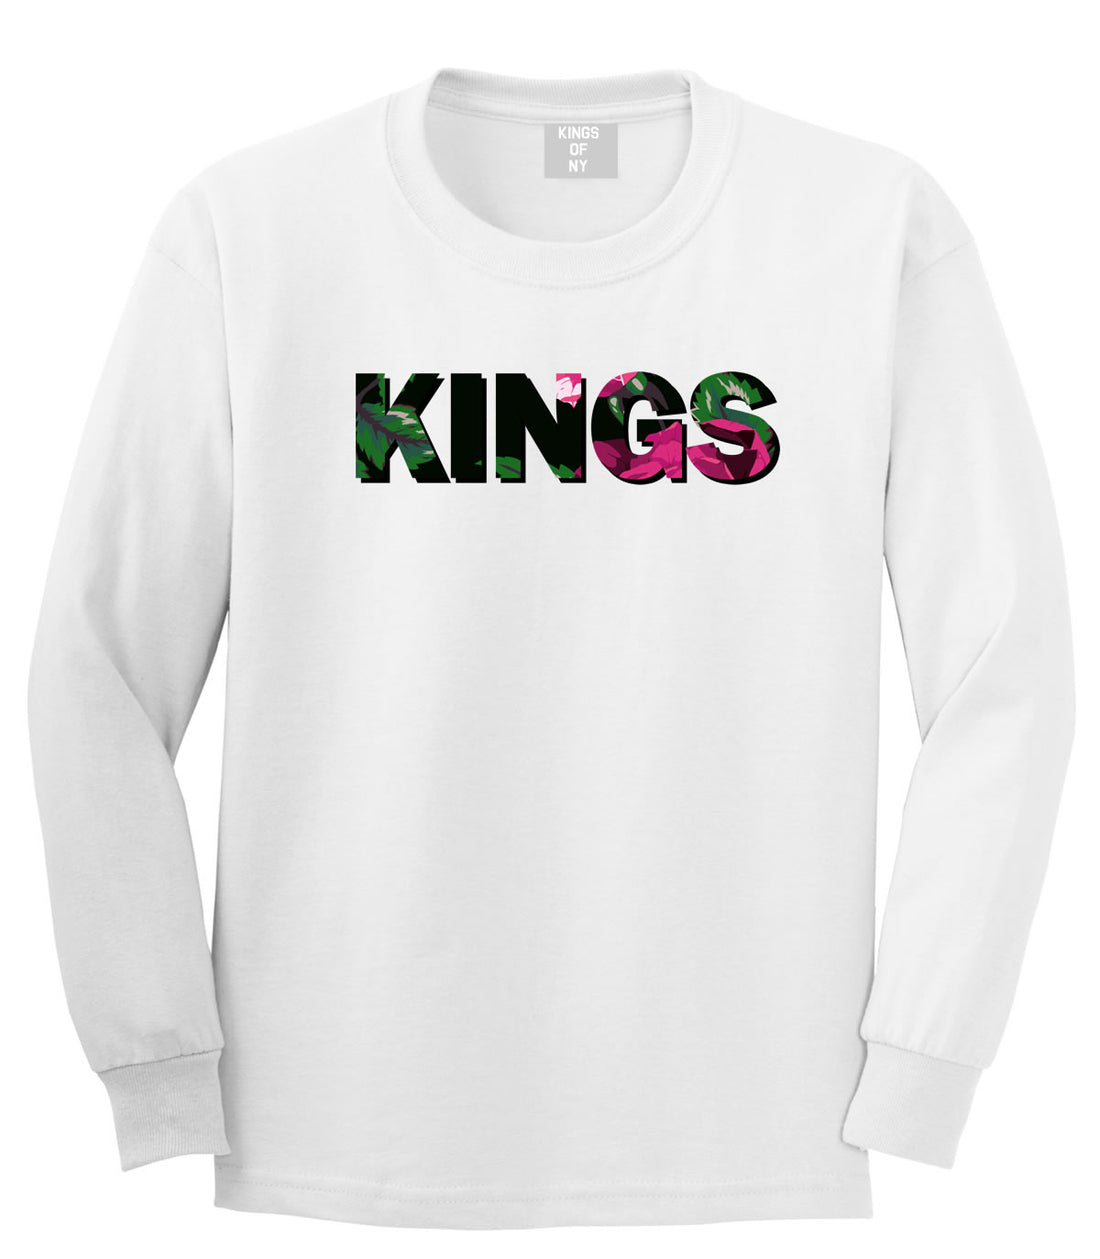 Kings Floral Print Pattern Long Sleeve T-Shirt in White by Kings Of NY